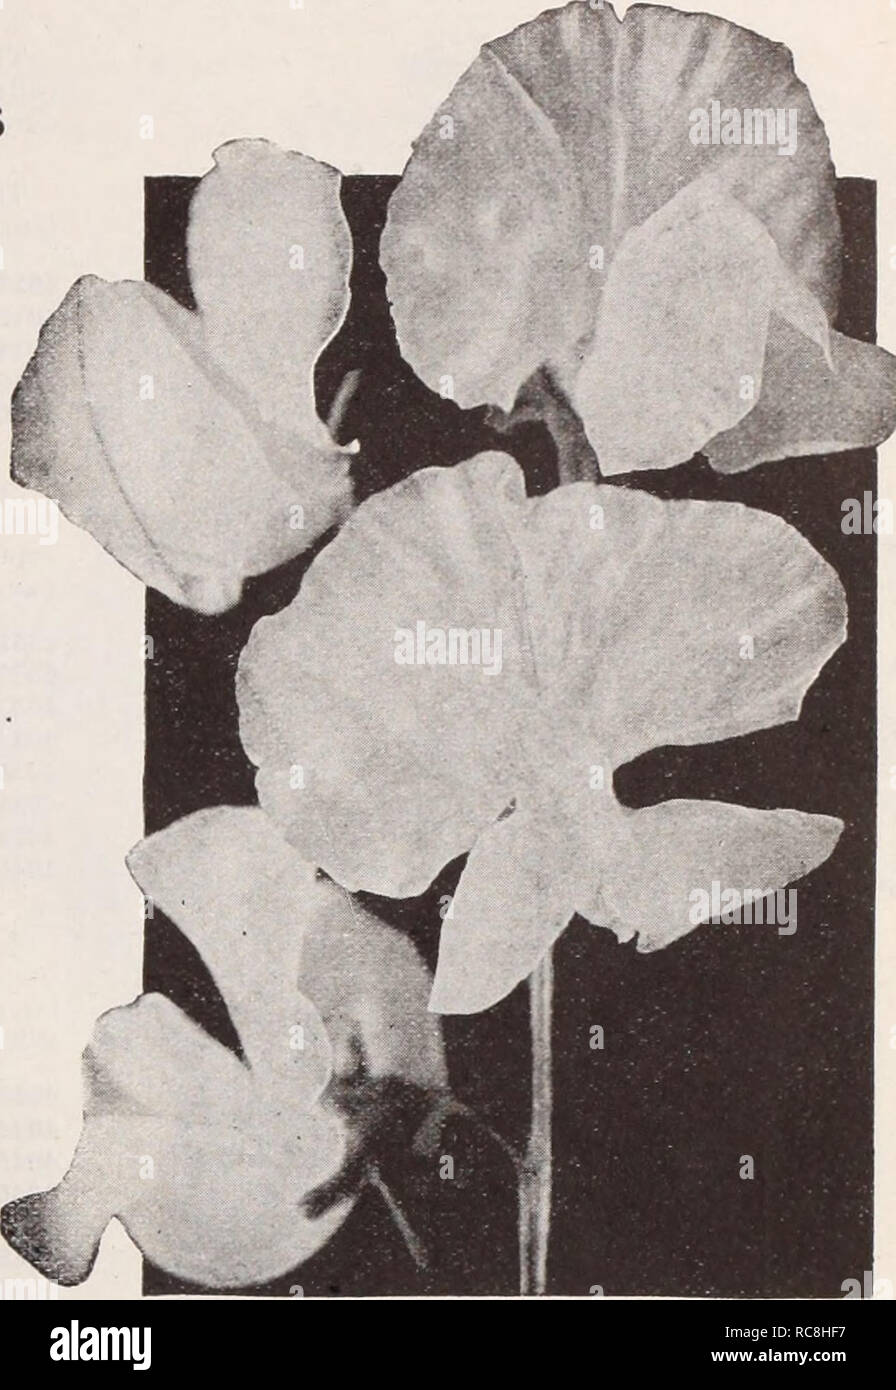 . Dreer's garden book / Henry A. Dreer.. Nursery Catalogue. k RE LIABLE FLOWER SEEDSj PHIMDELPiMI 103 Newer Varieties Orchid-flowered Sweet Peas SUMMER FLOWERING 4076 Bon-Bon. Rich pink with a glorious shading of amber combined with great vigor of growth, tremendous length of stem and flowers of enormous size. 15 cts. per pkt.; i oz., 60 cts.; oz., $1.00. 4187 Pirate Gold. The color is golden orange, quite a new shade which withstands the hot sun. A strong vigorous grower, with well formed flowers. 15 cts. per pkt.;  oz., 60 cts.; oz., $1.00. 4195 Rosie. Deep rose pink, a very popular color.  Stock Photo